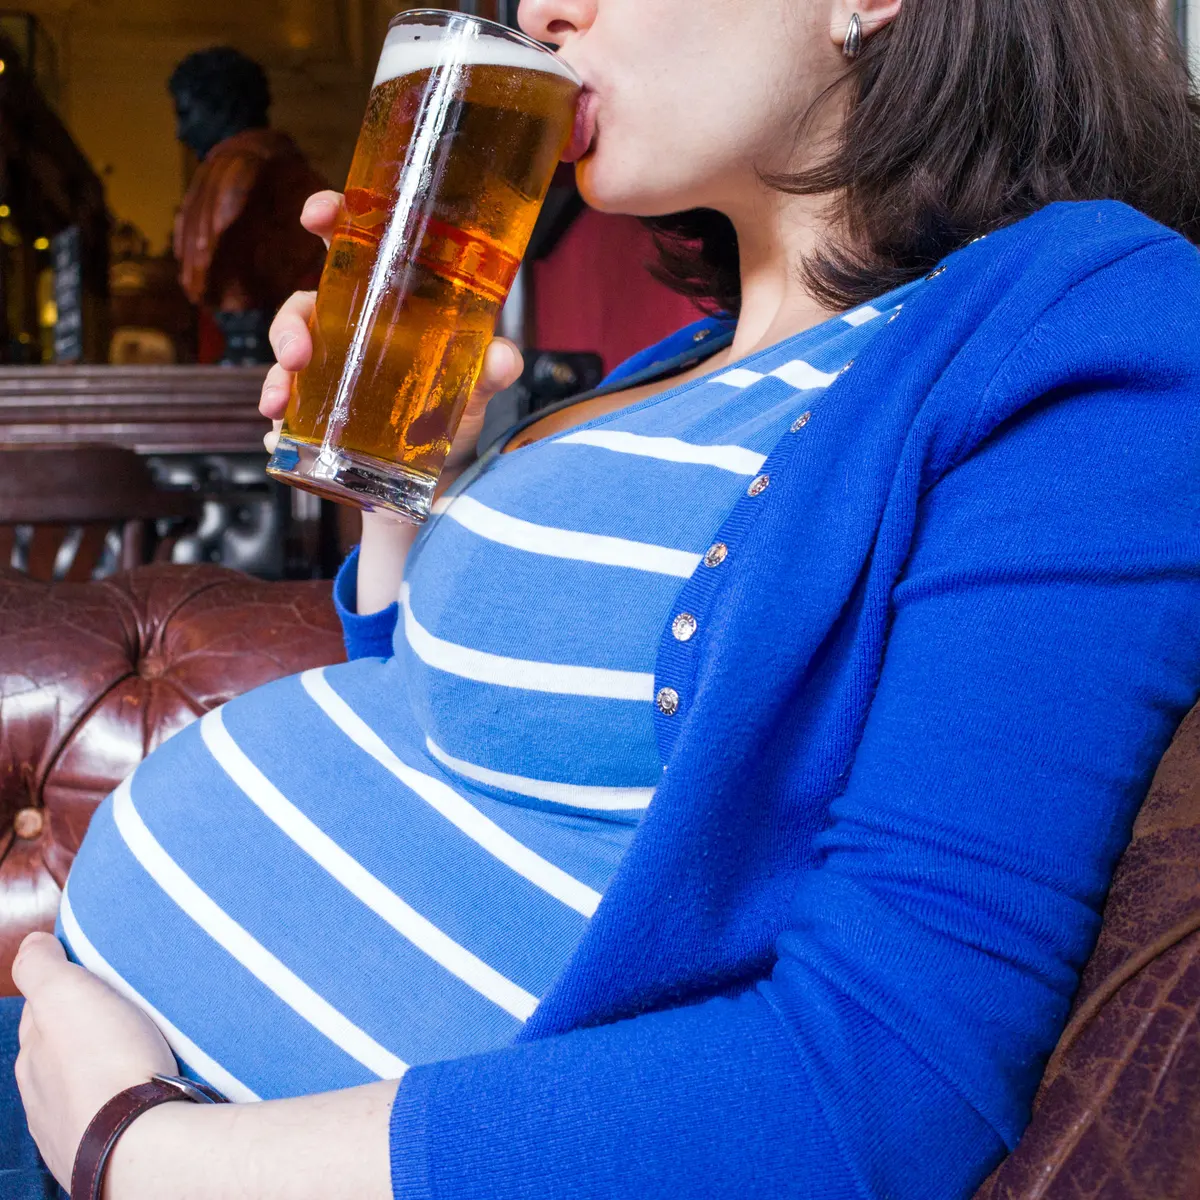 Is it safe for pregnant women to drink beer?  - first